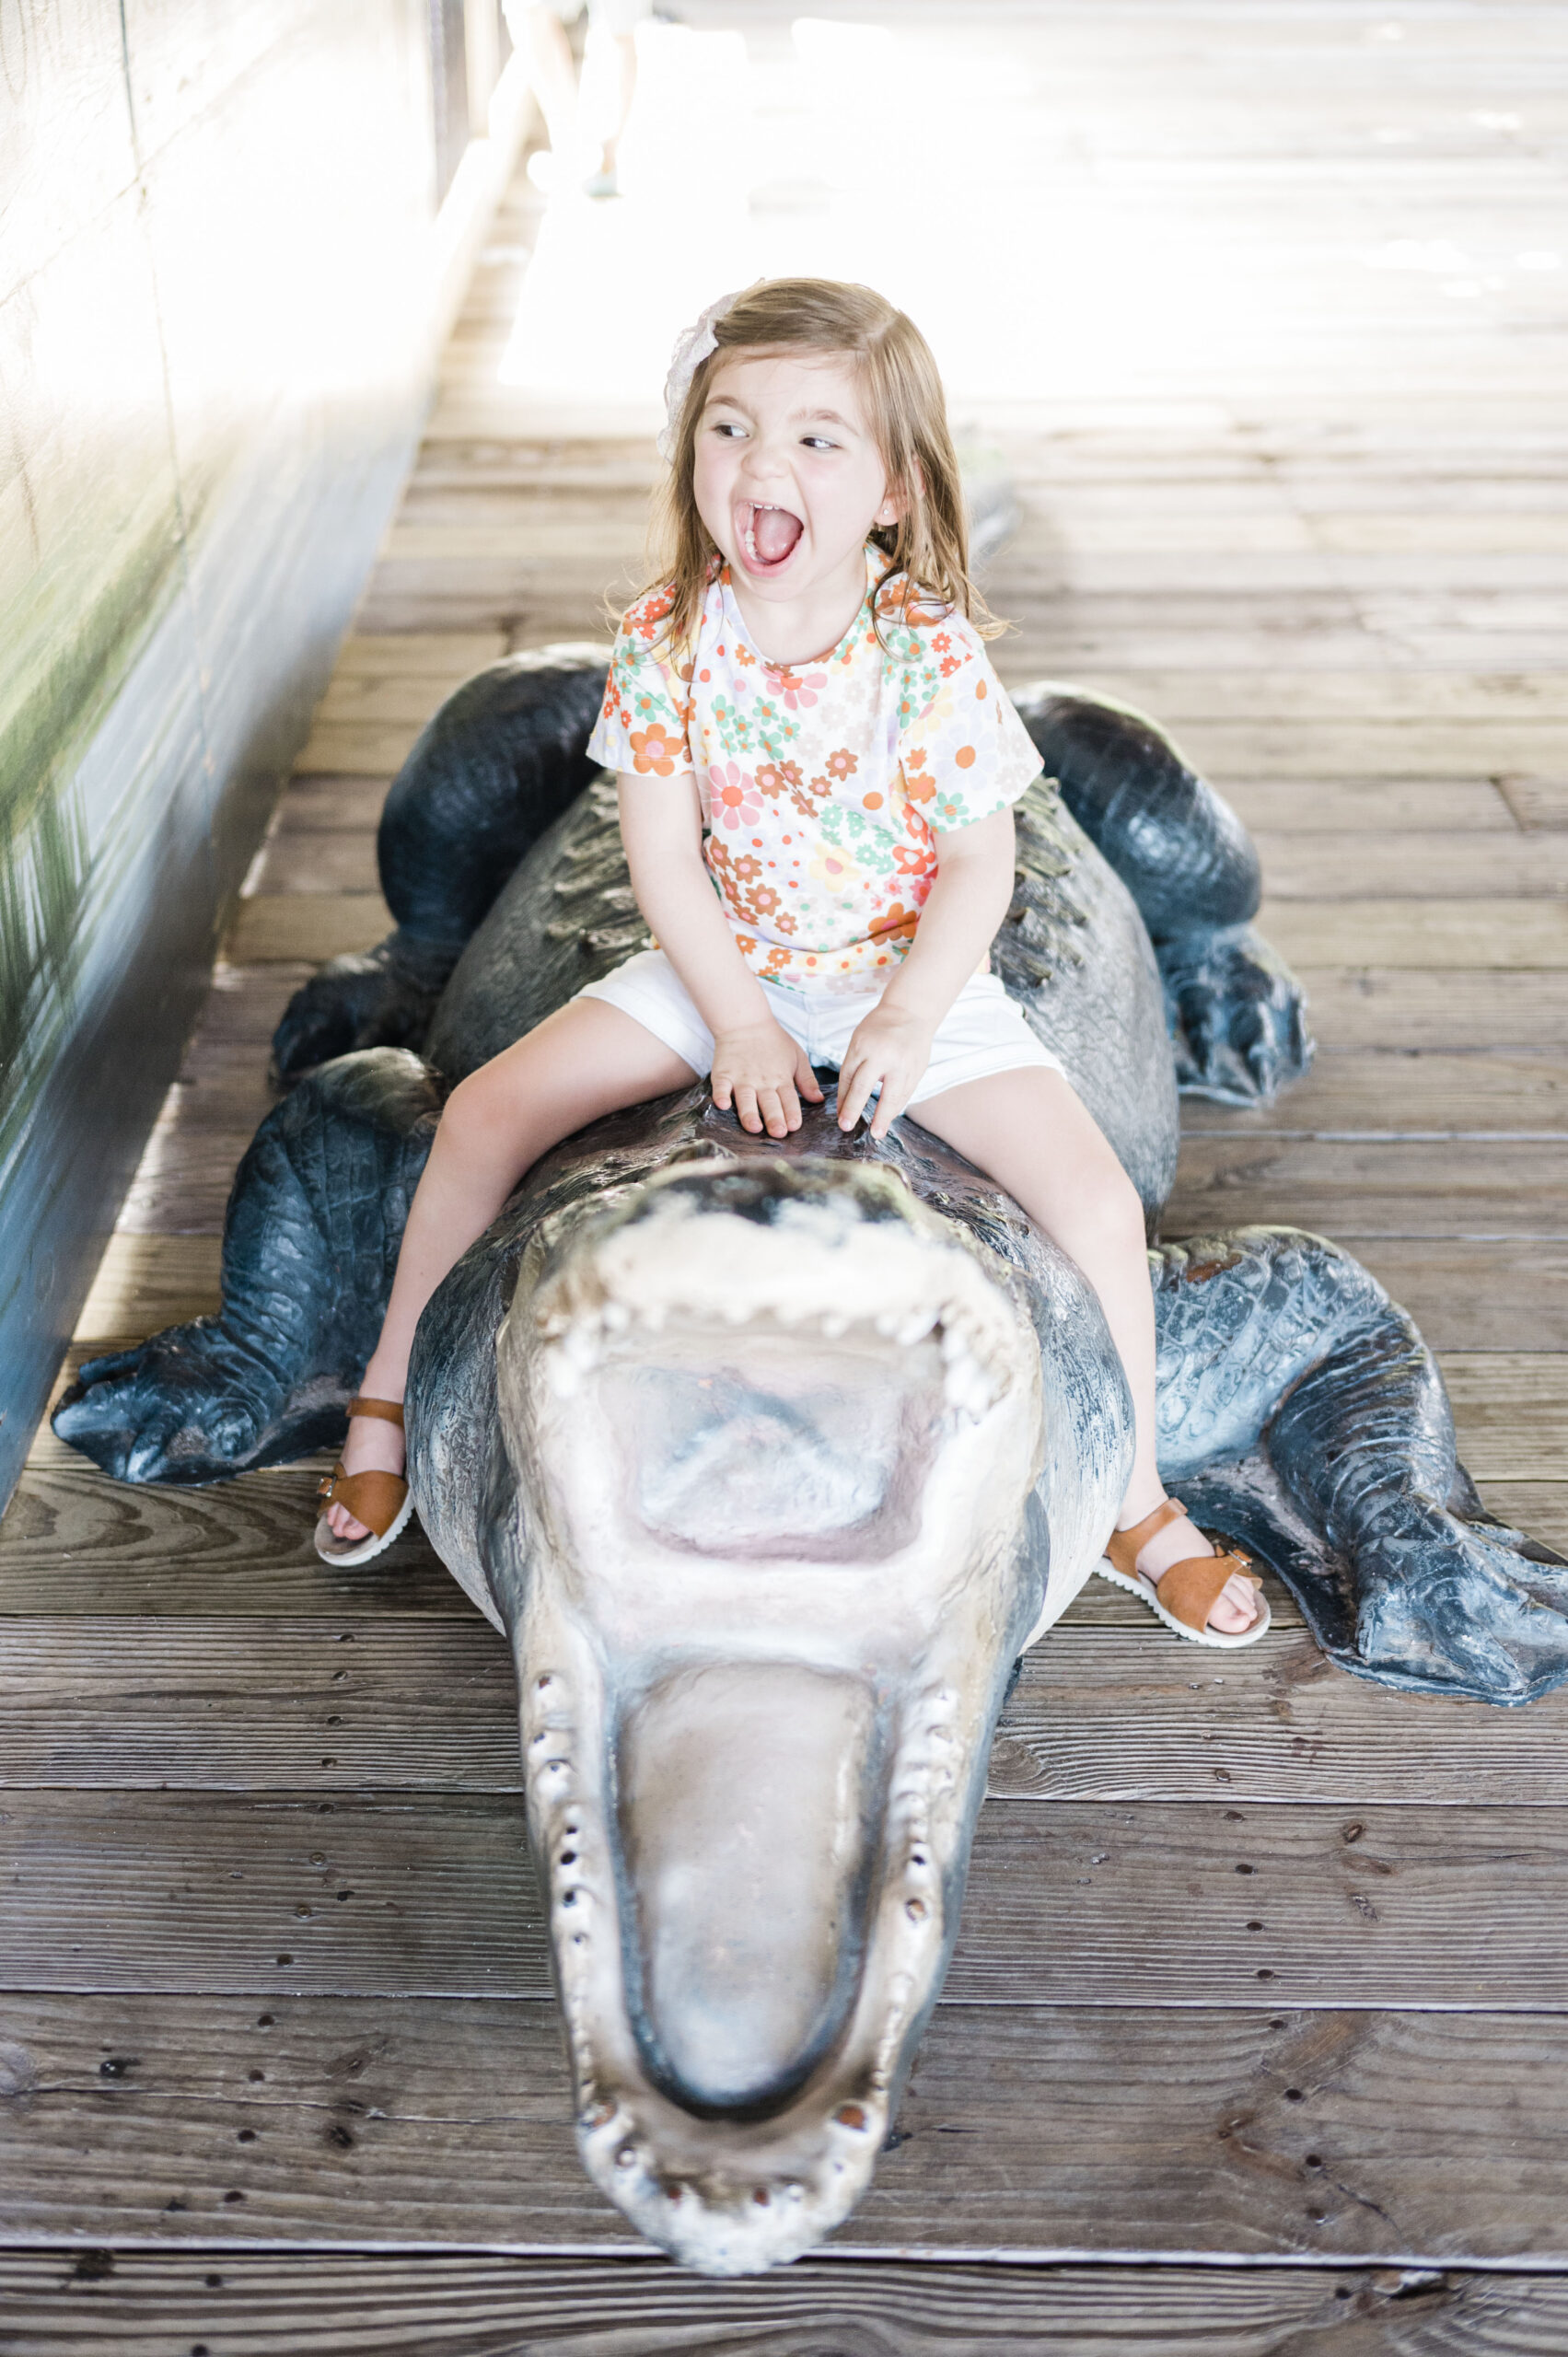 little girl with making a screaming face sitting on fake alligator, go city pass